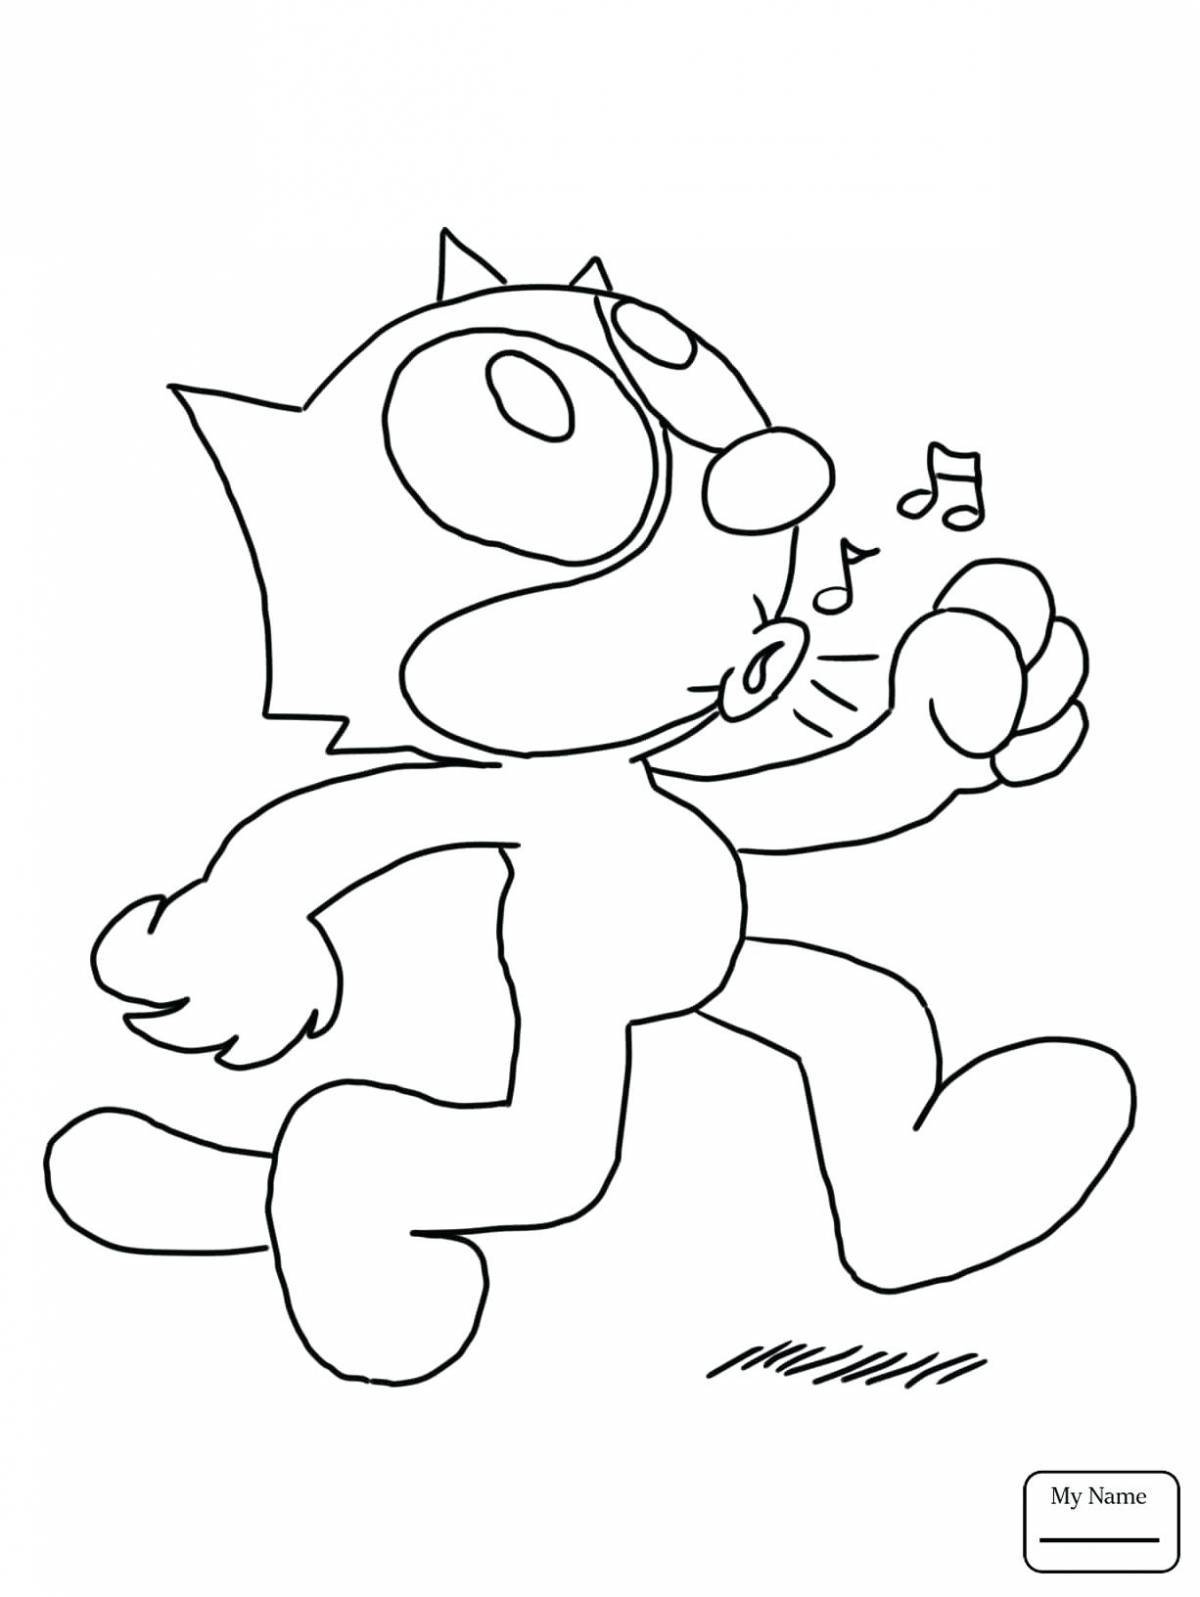 Fancy cardboard cat coloring page